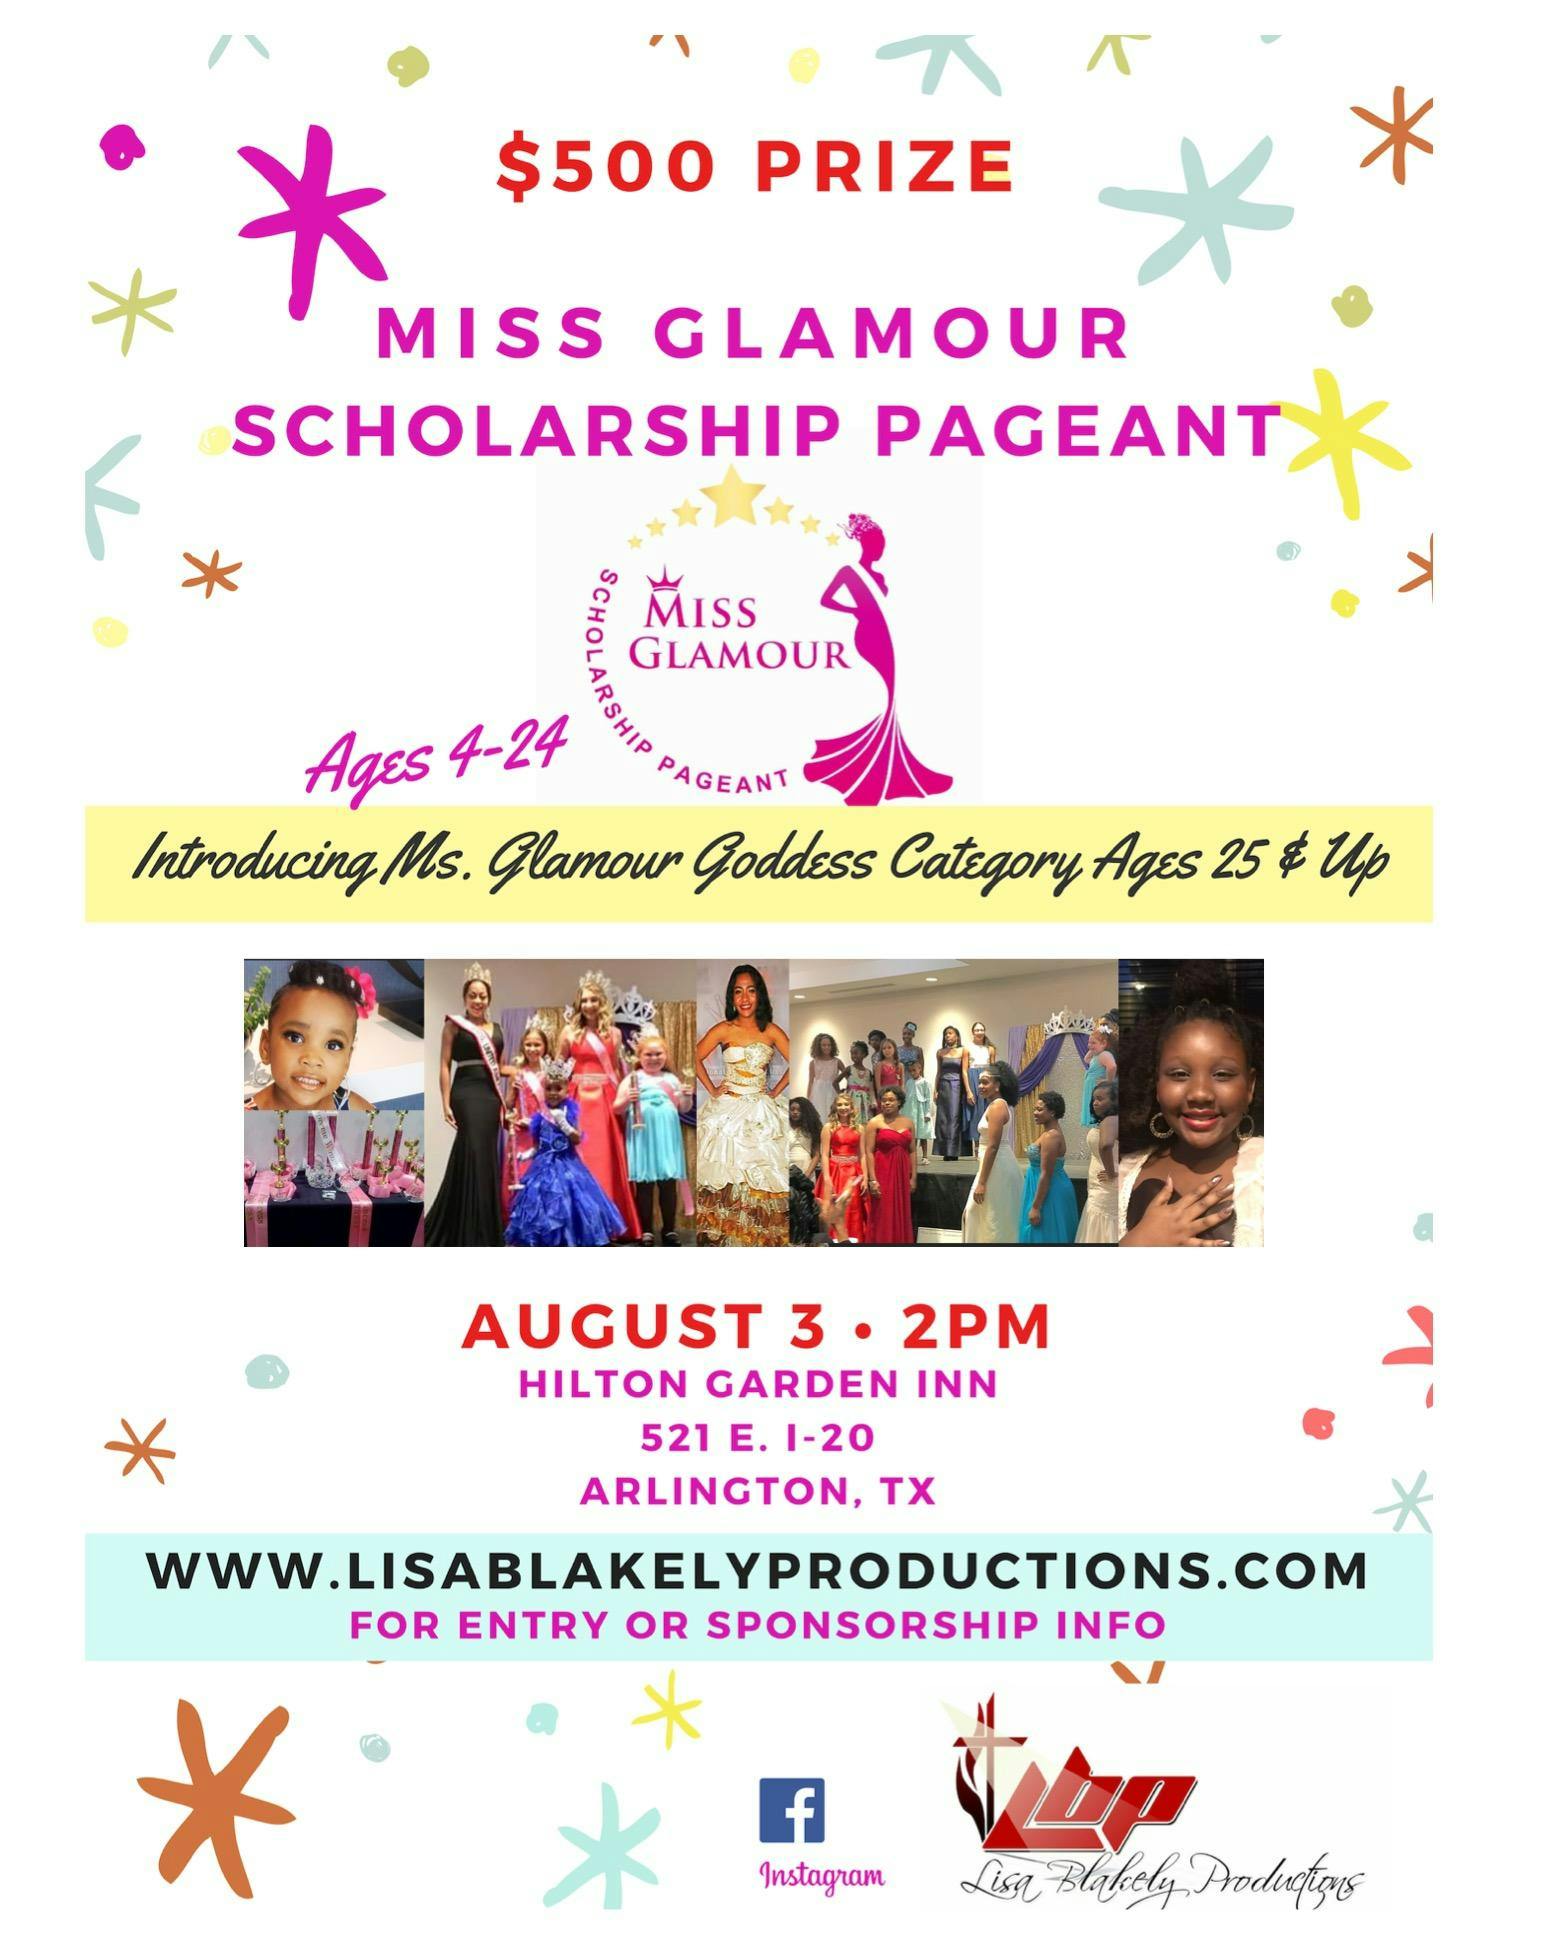 Miss Glamour Scholarship Pageant 3 Aug 2019